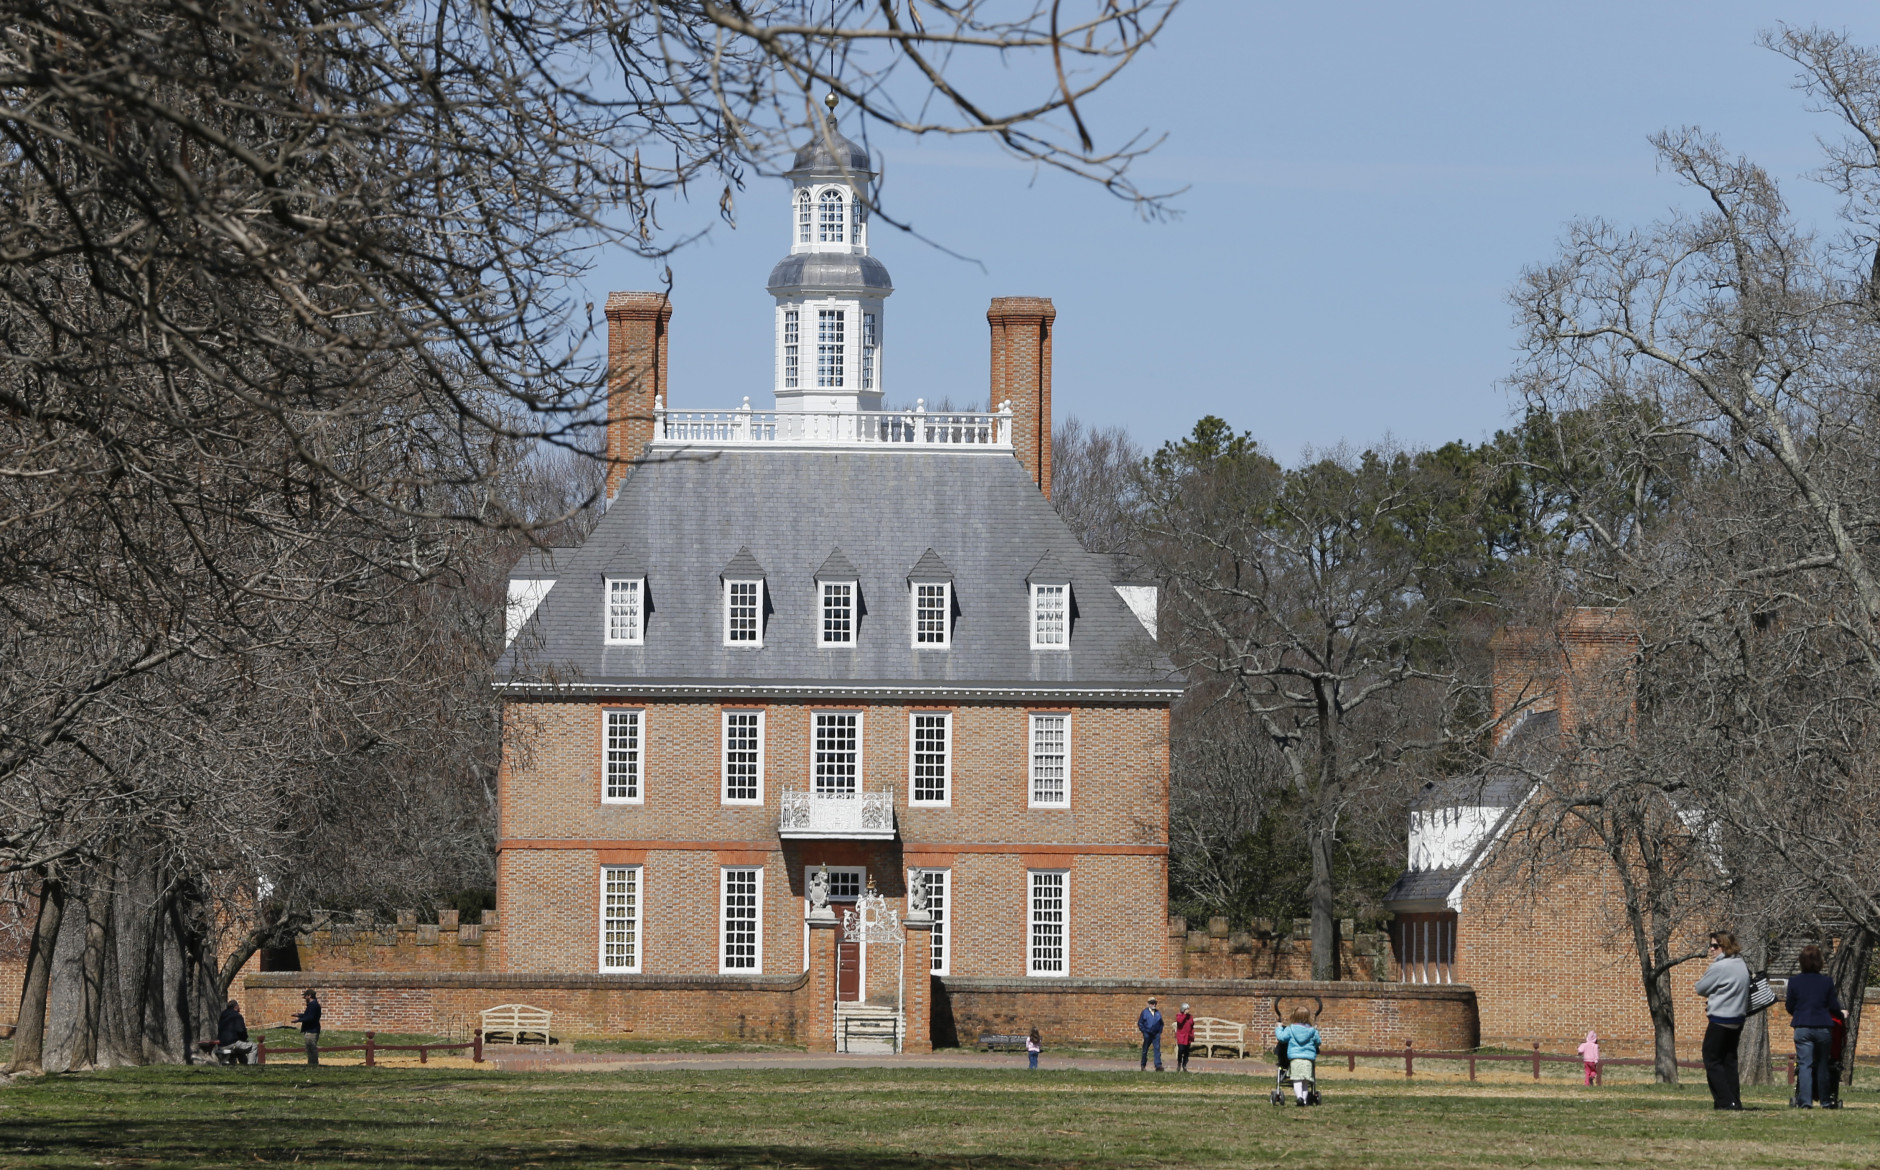 Visitors walk to the Governors palace along Duke of Gloucester street in the Colonial Williamsburg area of Williamsburg, Va., Wednesday, March 18, 2015. AP Photo/ Steve Helber)